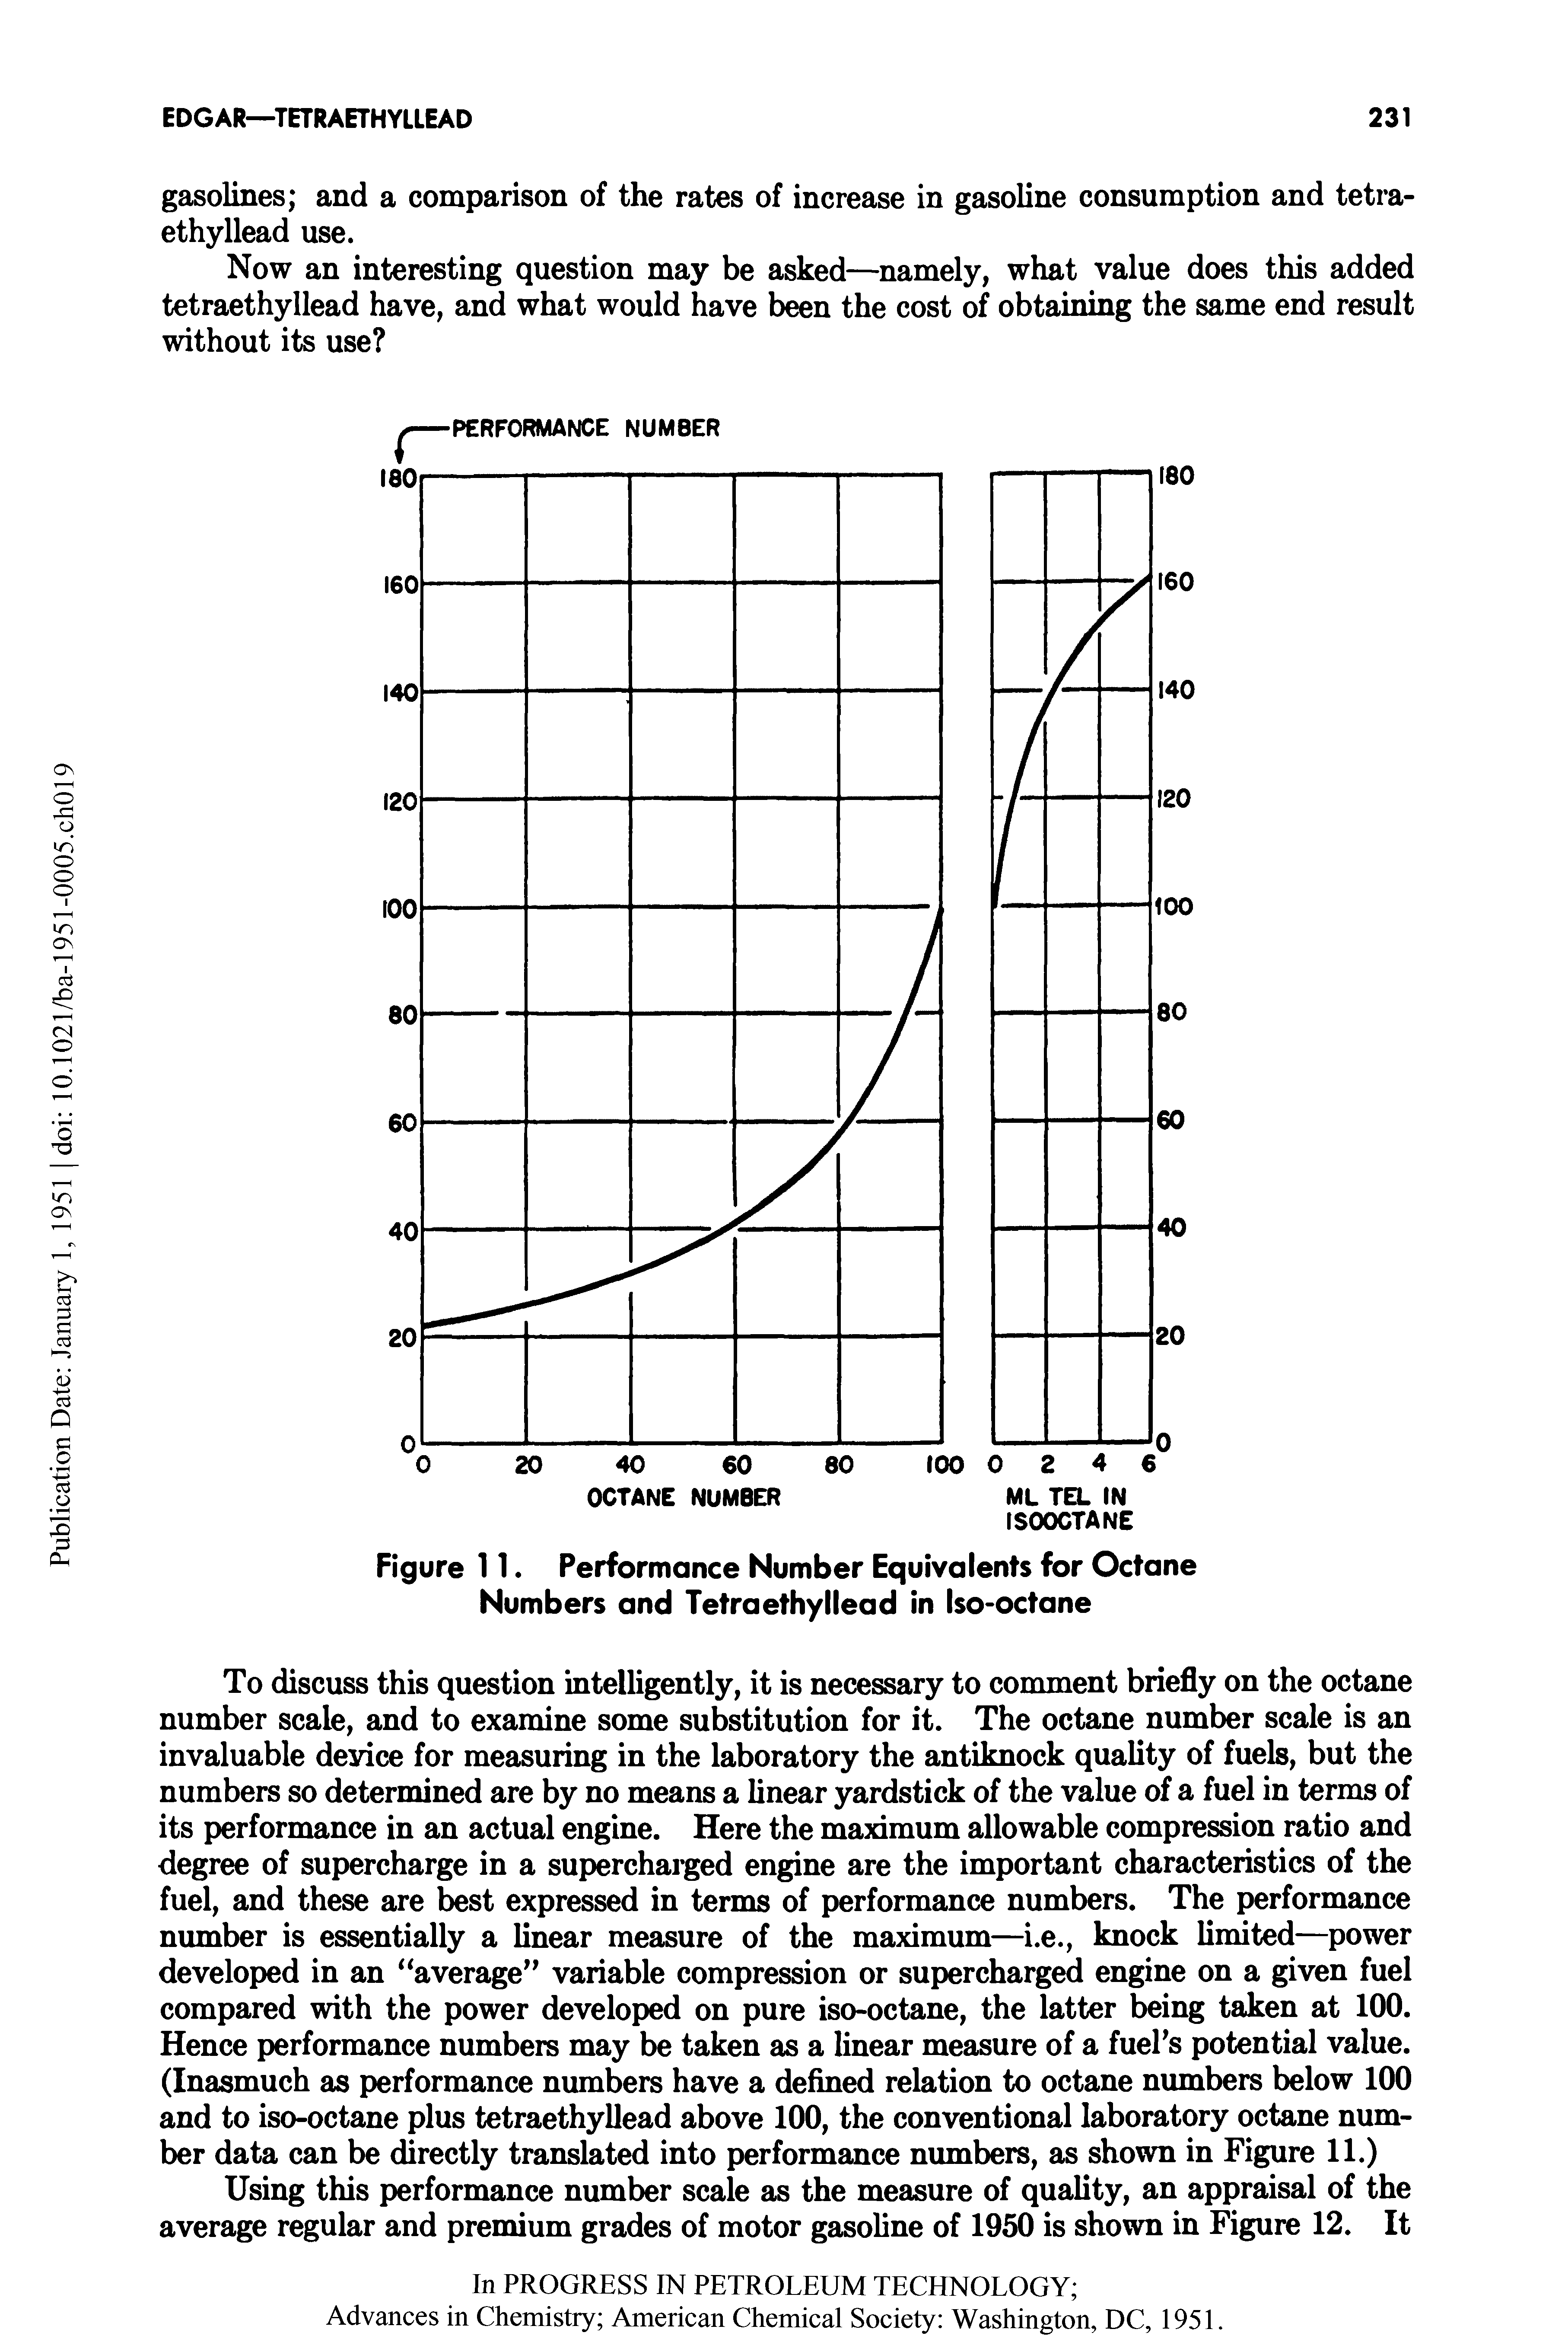 Figure 11. Performance Number Equivalents for Octane Numbers and Tetraethyllead in Iso-octane...